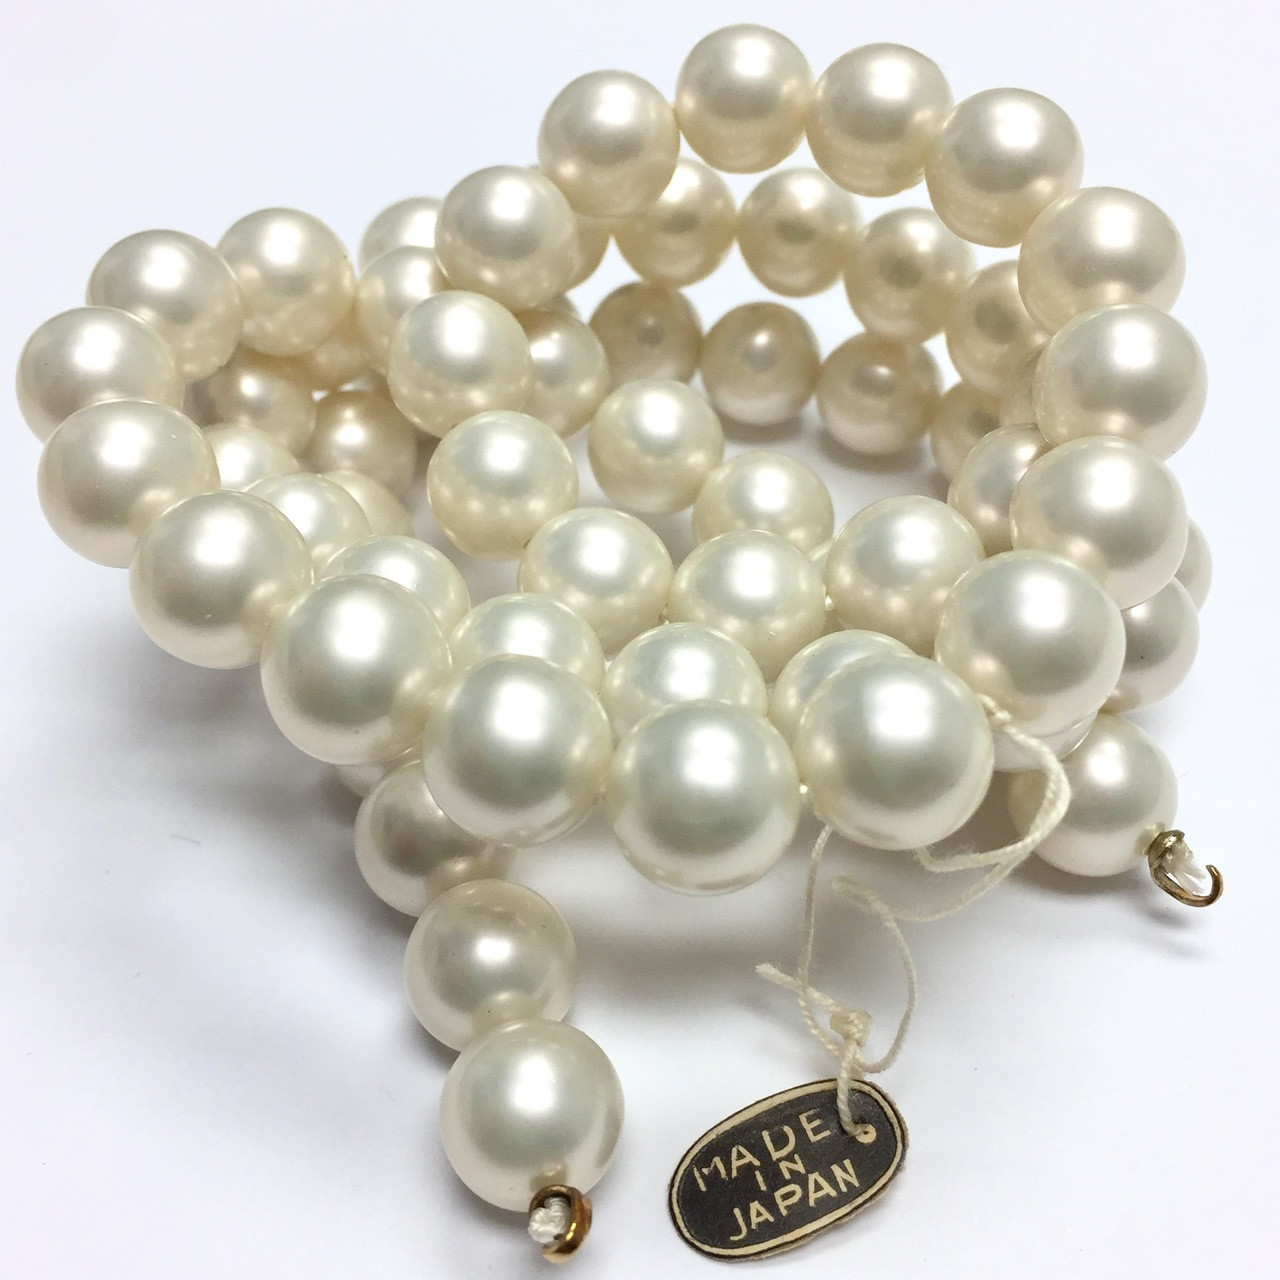 Wonderfully Chunky Vintage Faux Pearl and Crystal Collar and Bracelet Set -  The Jewelry Stylist